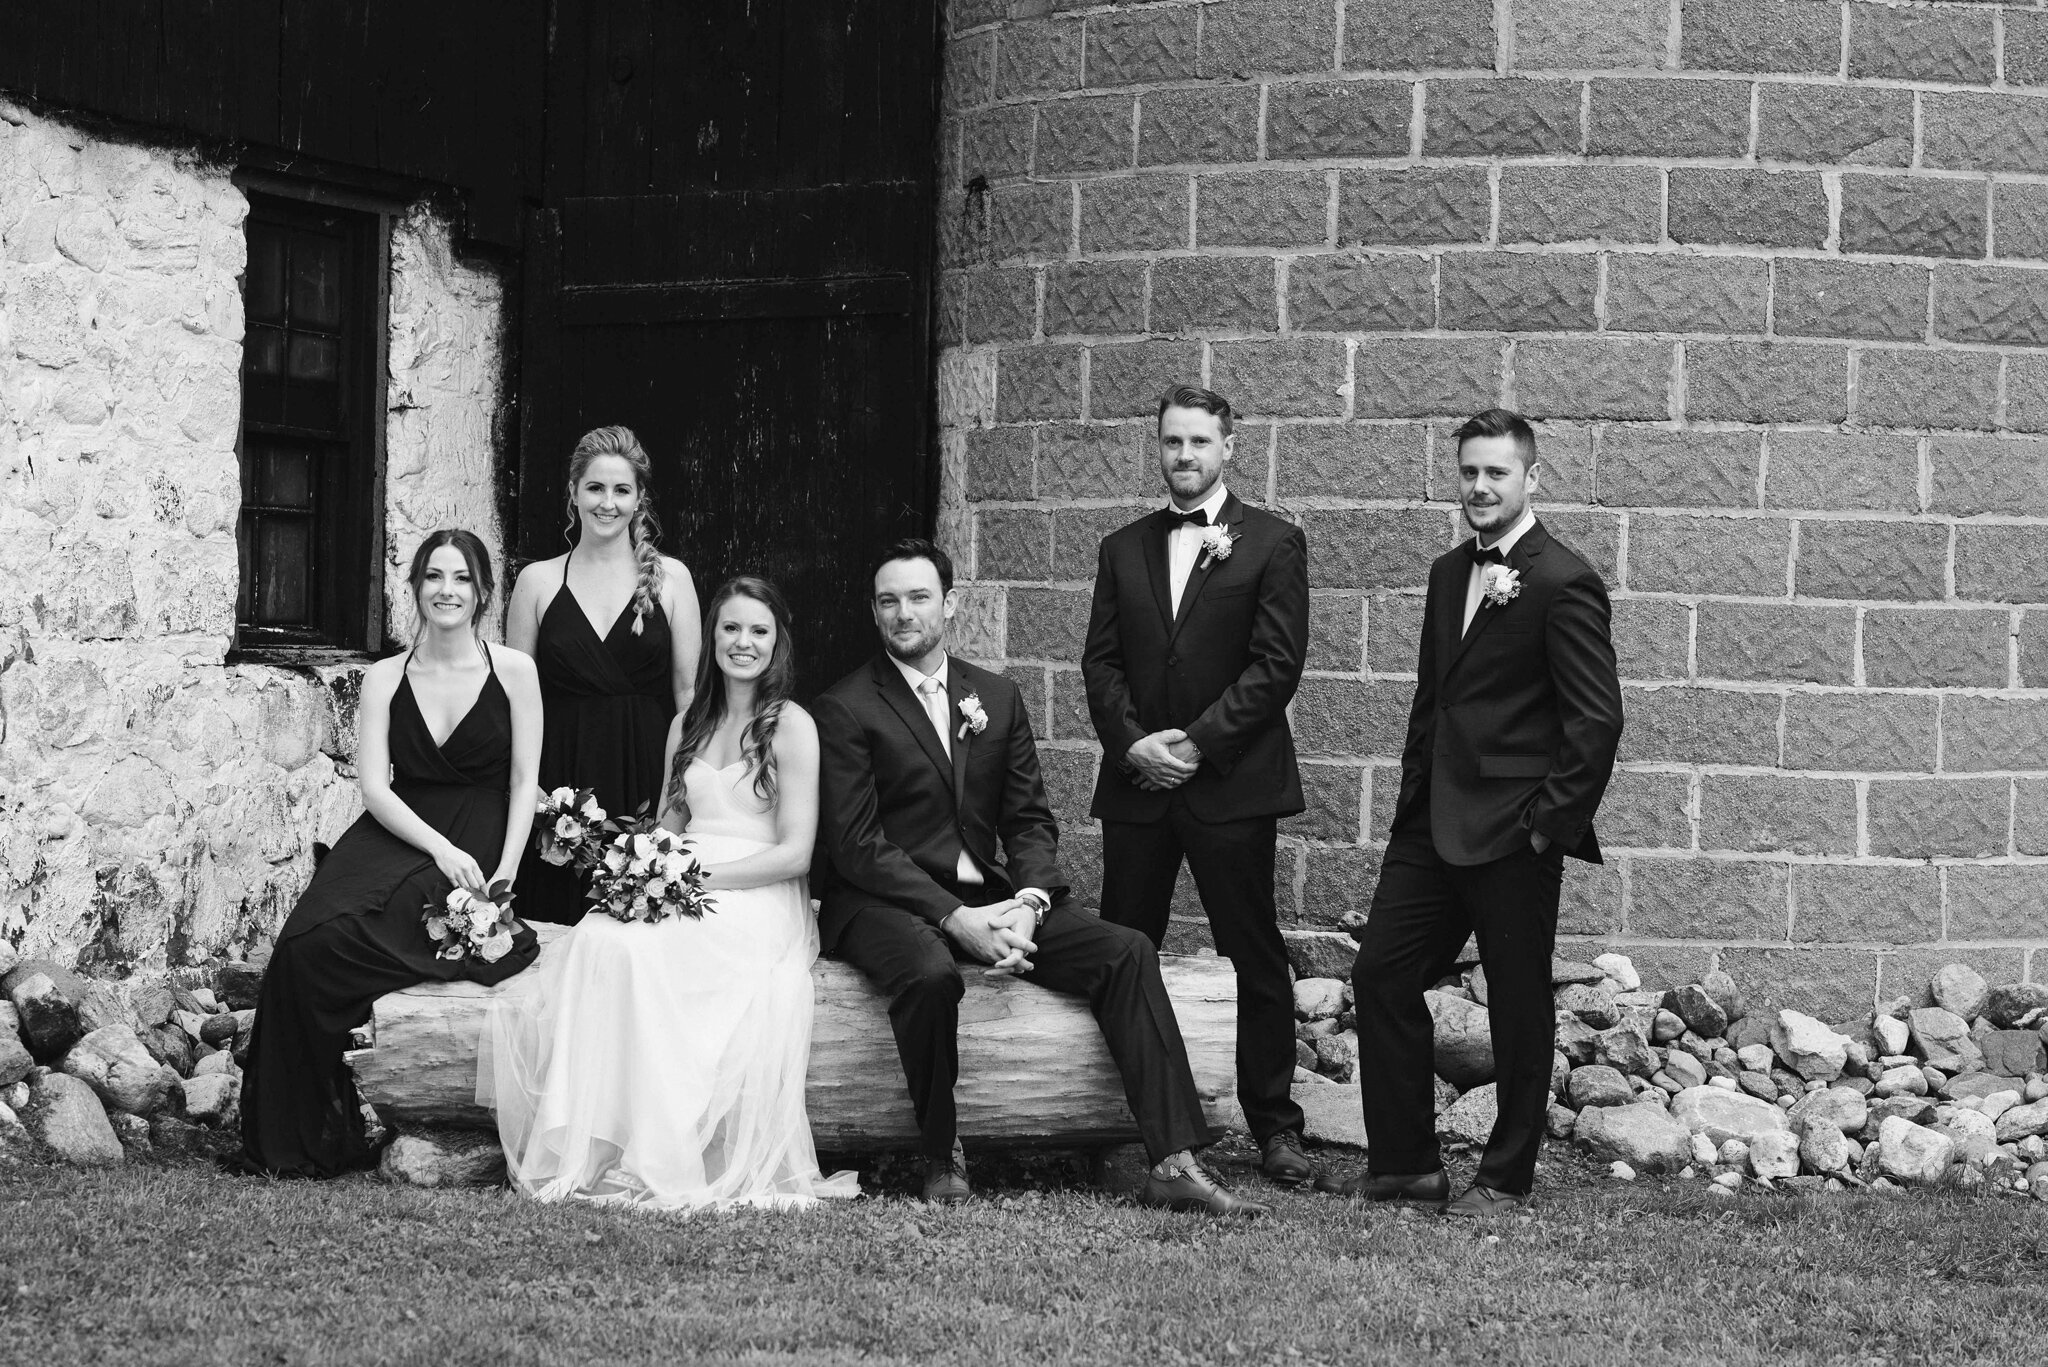 Wedding Party portrait in front of Barn at intimate backyard geo